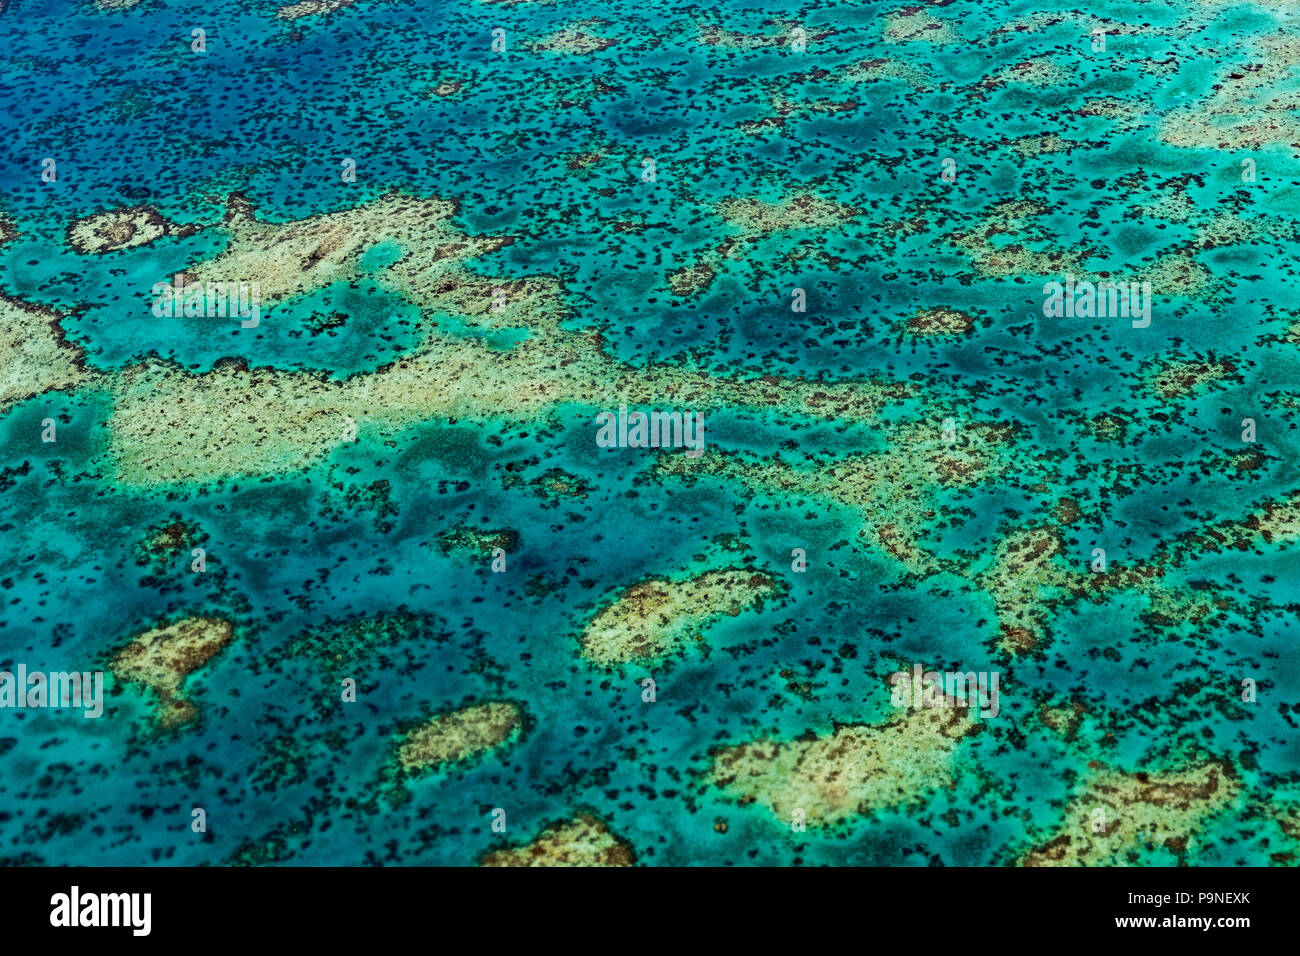 An aerial view of a coral reef rising up through turquoise seas. Stock Photo